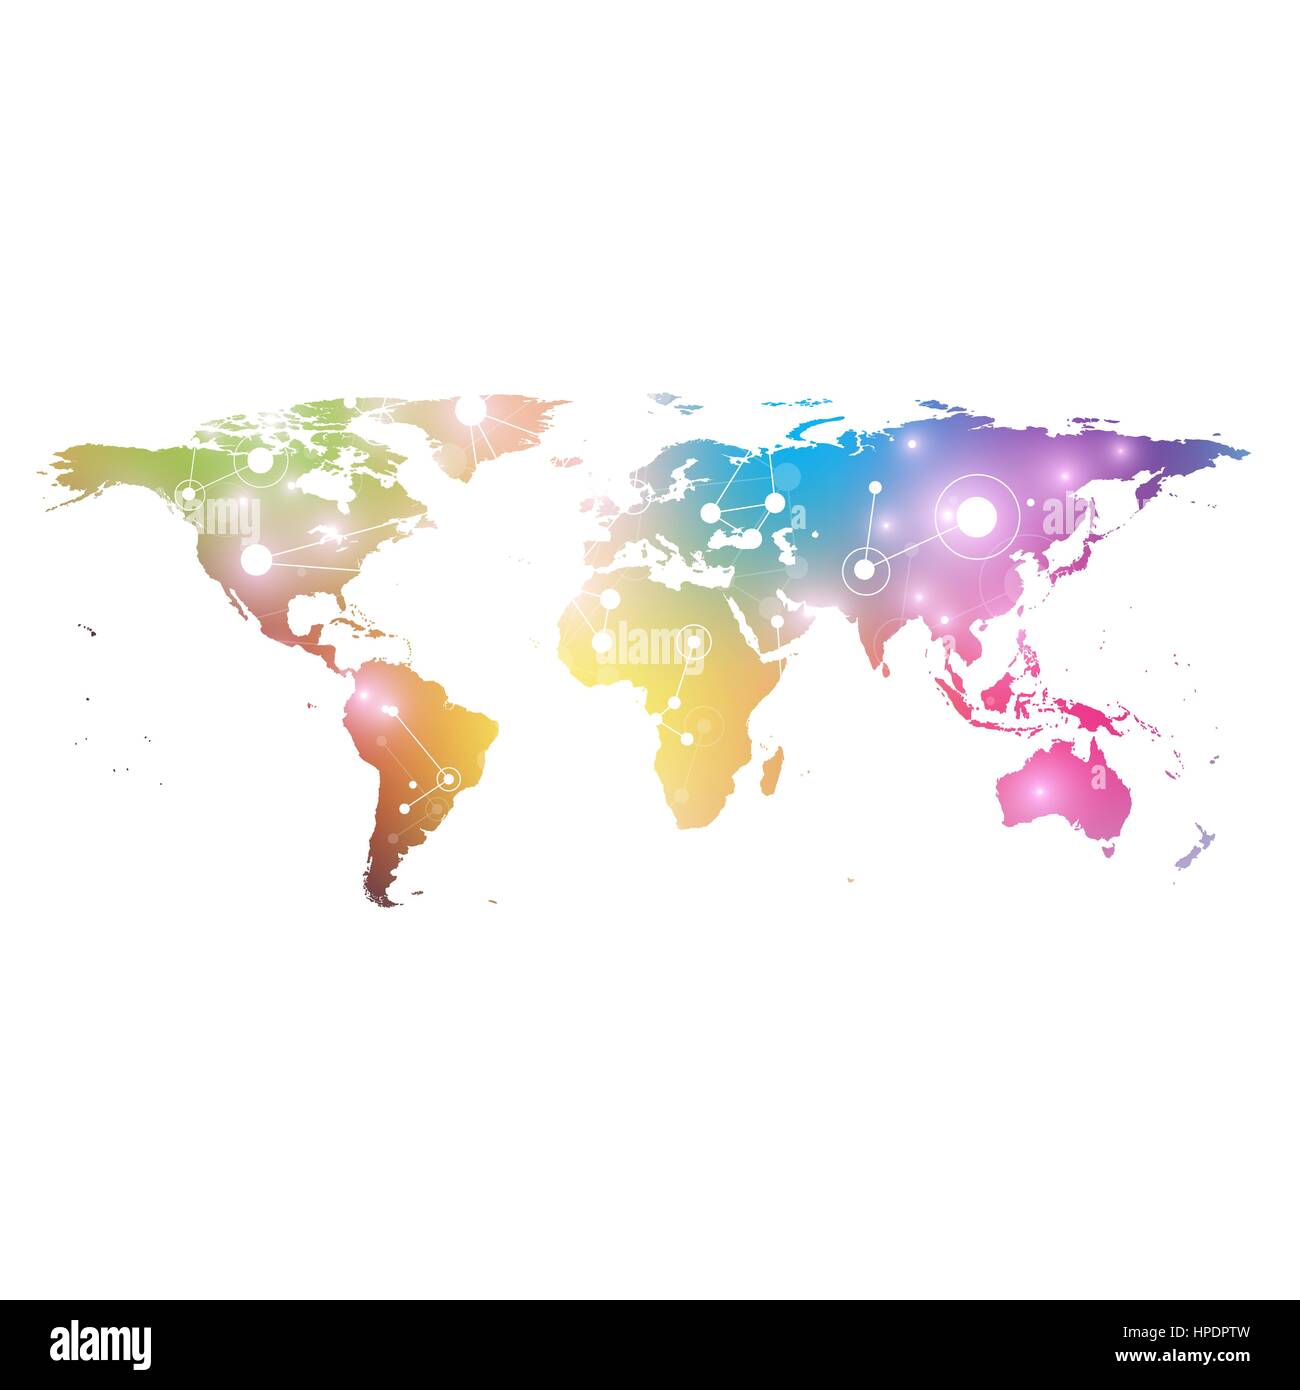 World map with global technology networking concept. Digital data visualization. Lines plexus. Big Data background communication. Scientific vector illustration telecommunication. Stock Vector